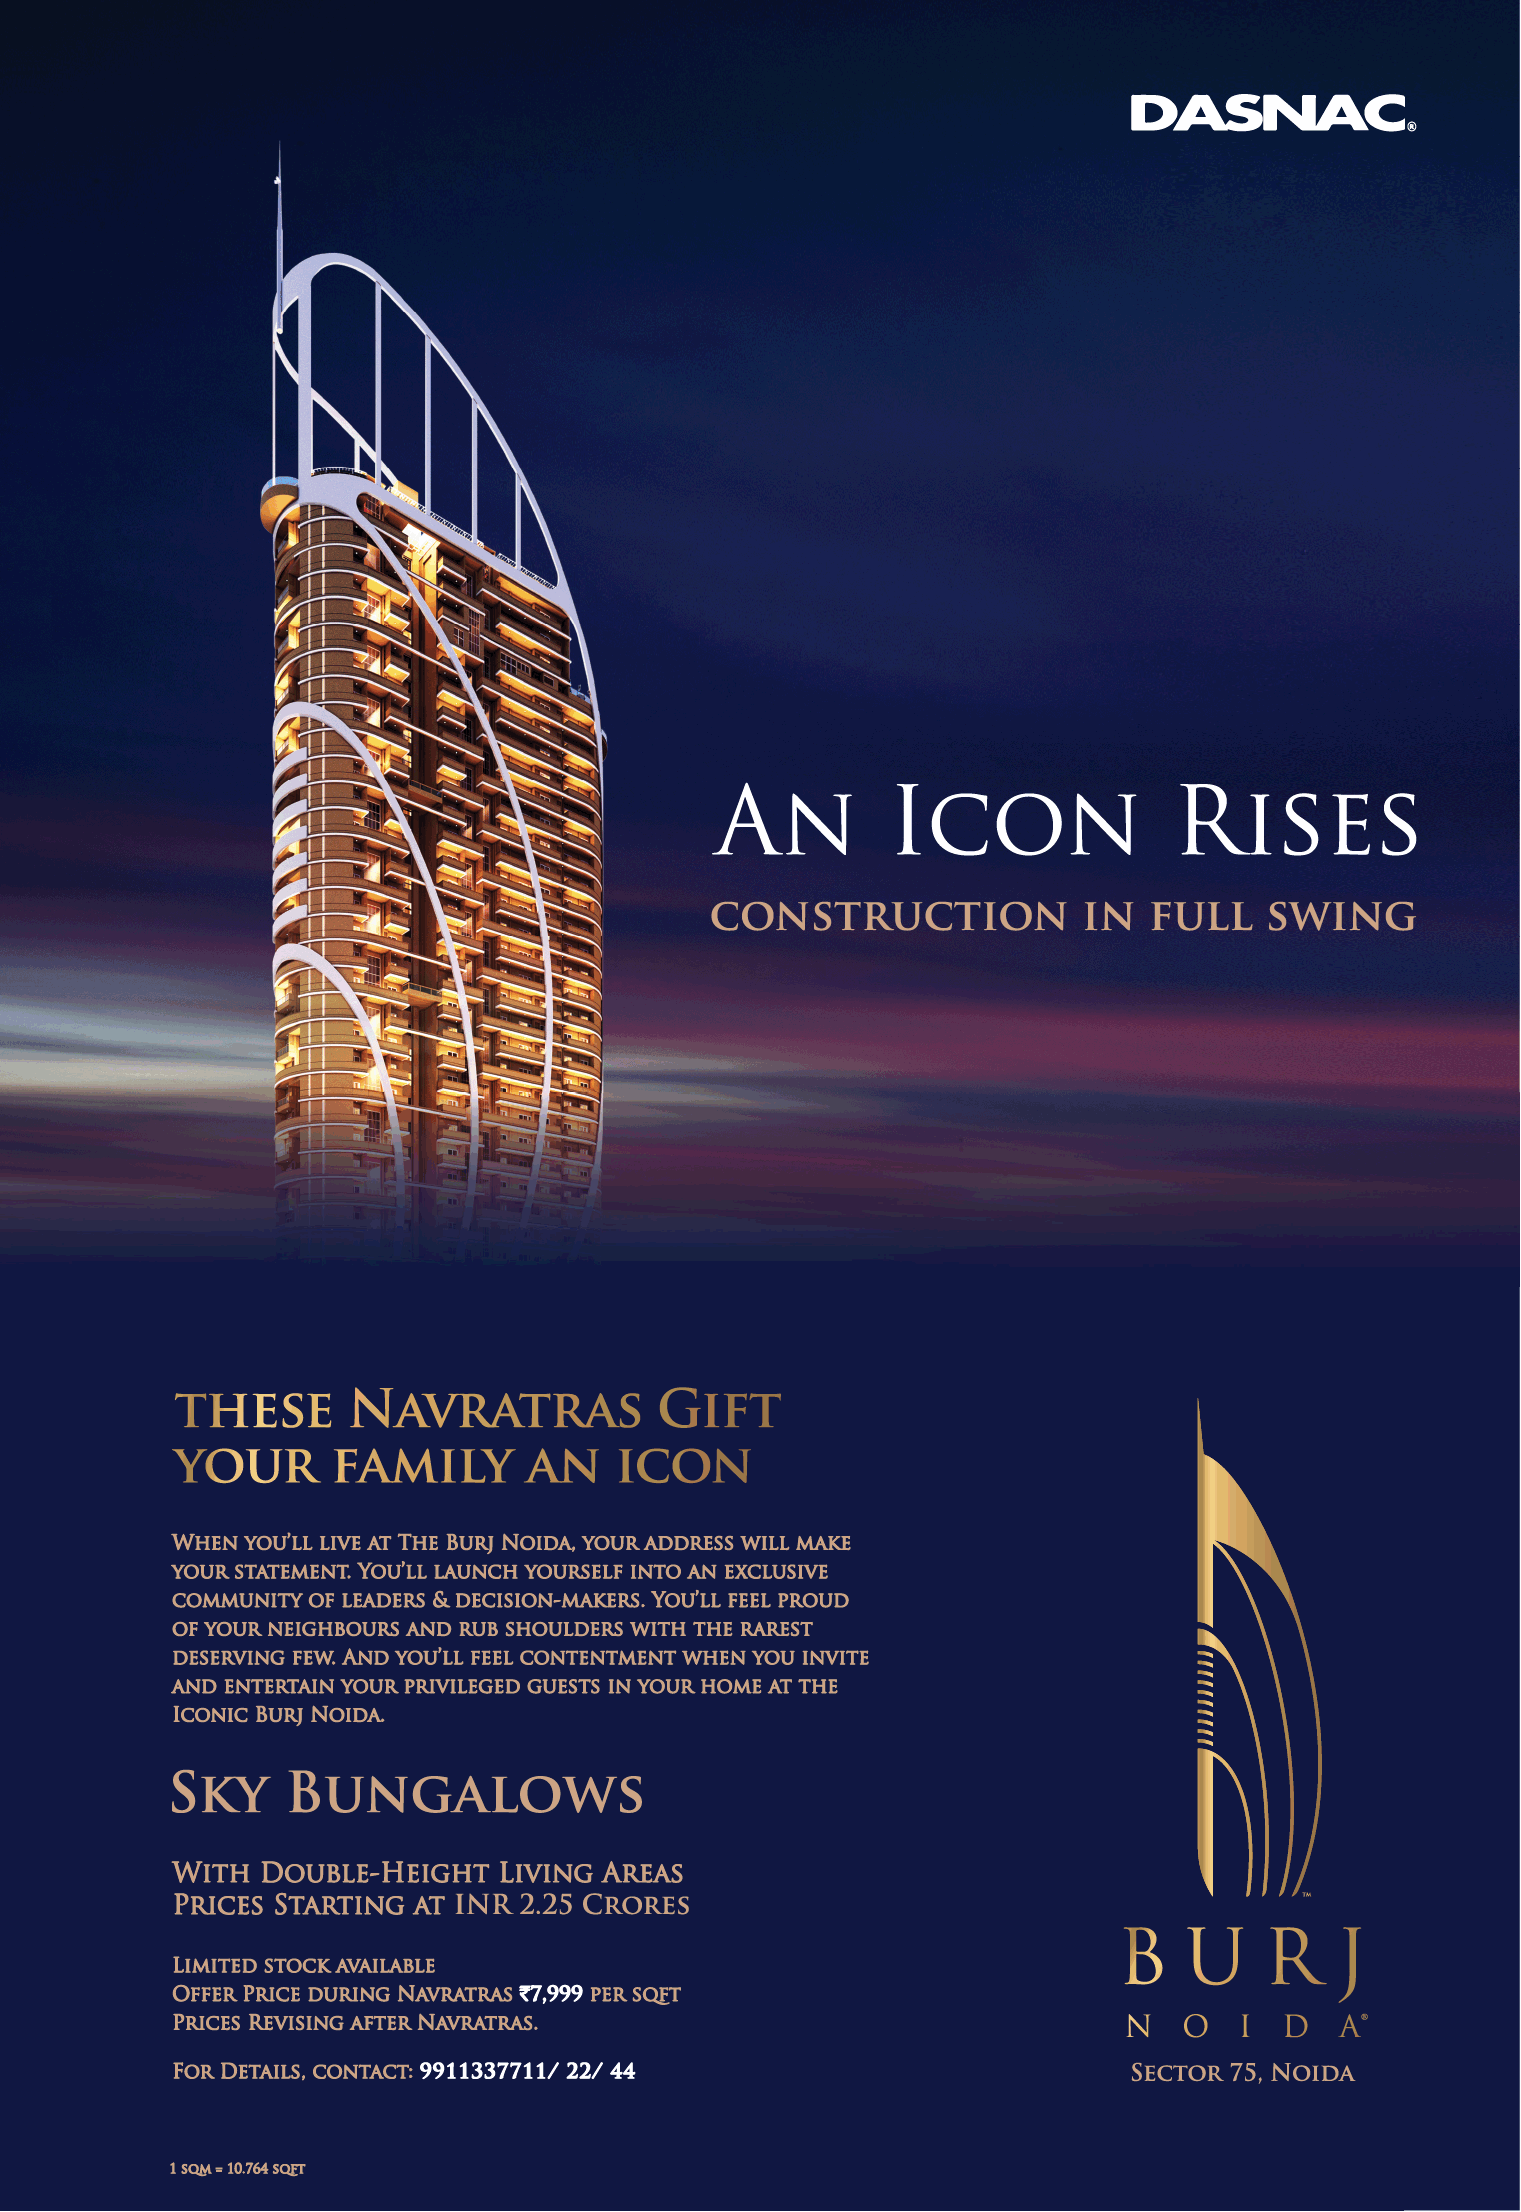 This navratri gift your family an icon Dasnac Burj, Central Noida Update